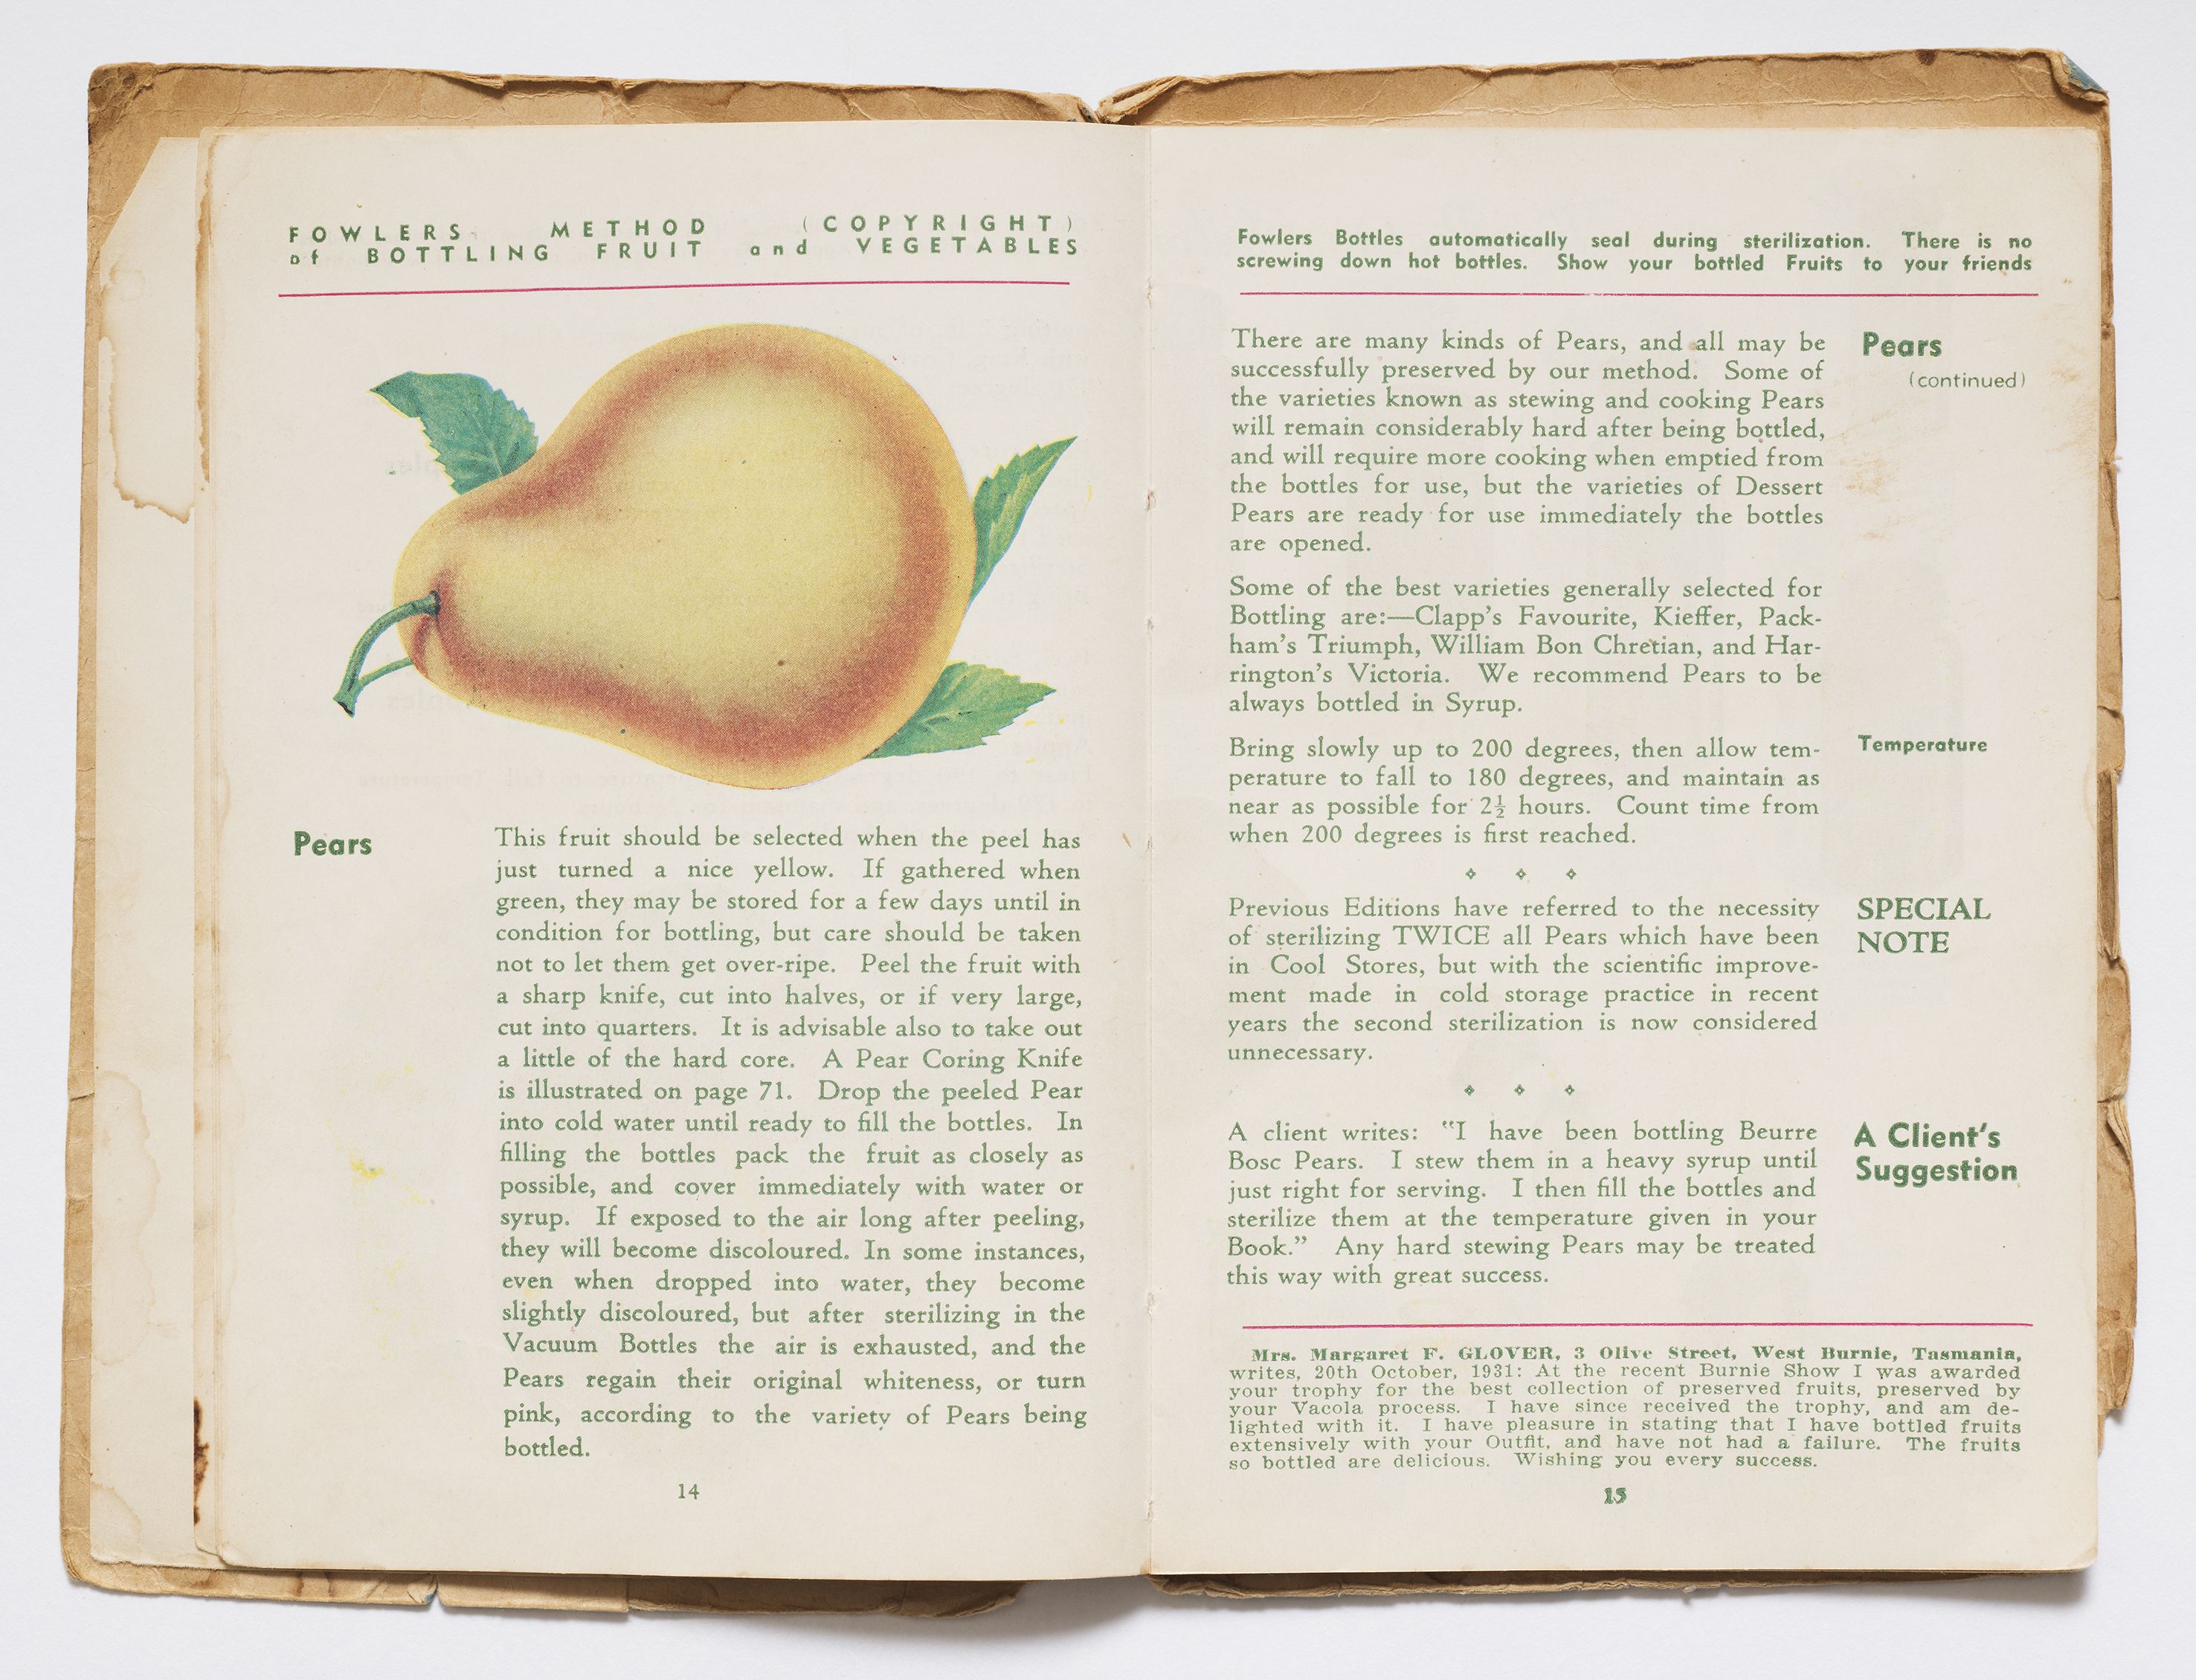 A page of the Fowlers booklet with a yellow illustration of a pear, The subtitle says Pear and the method for bottling is described.